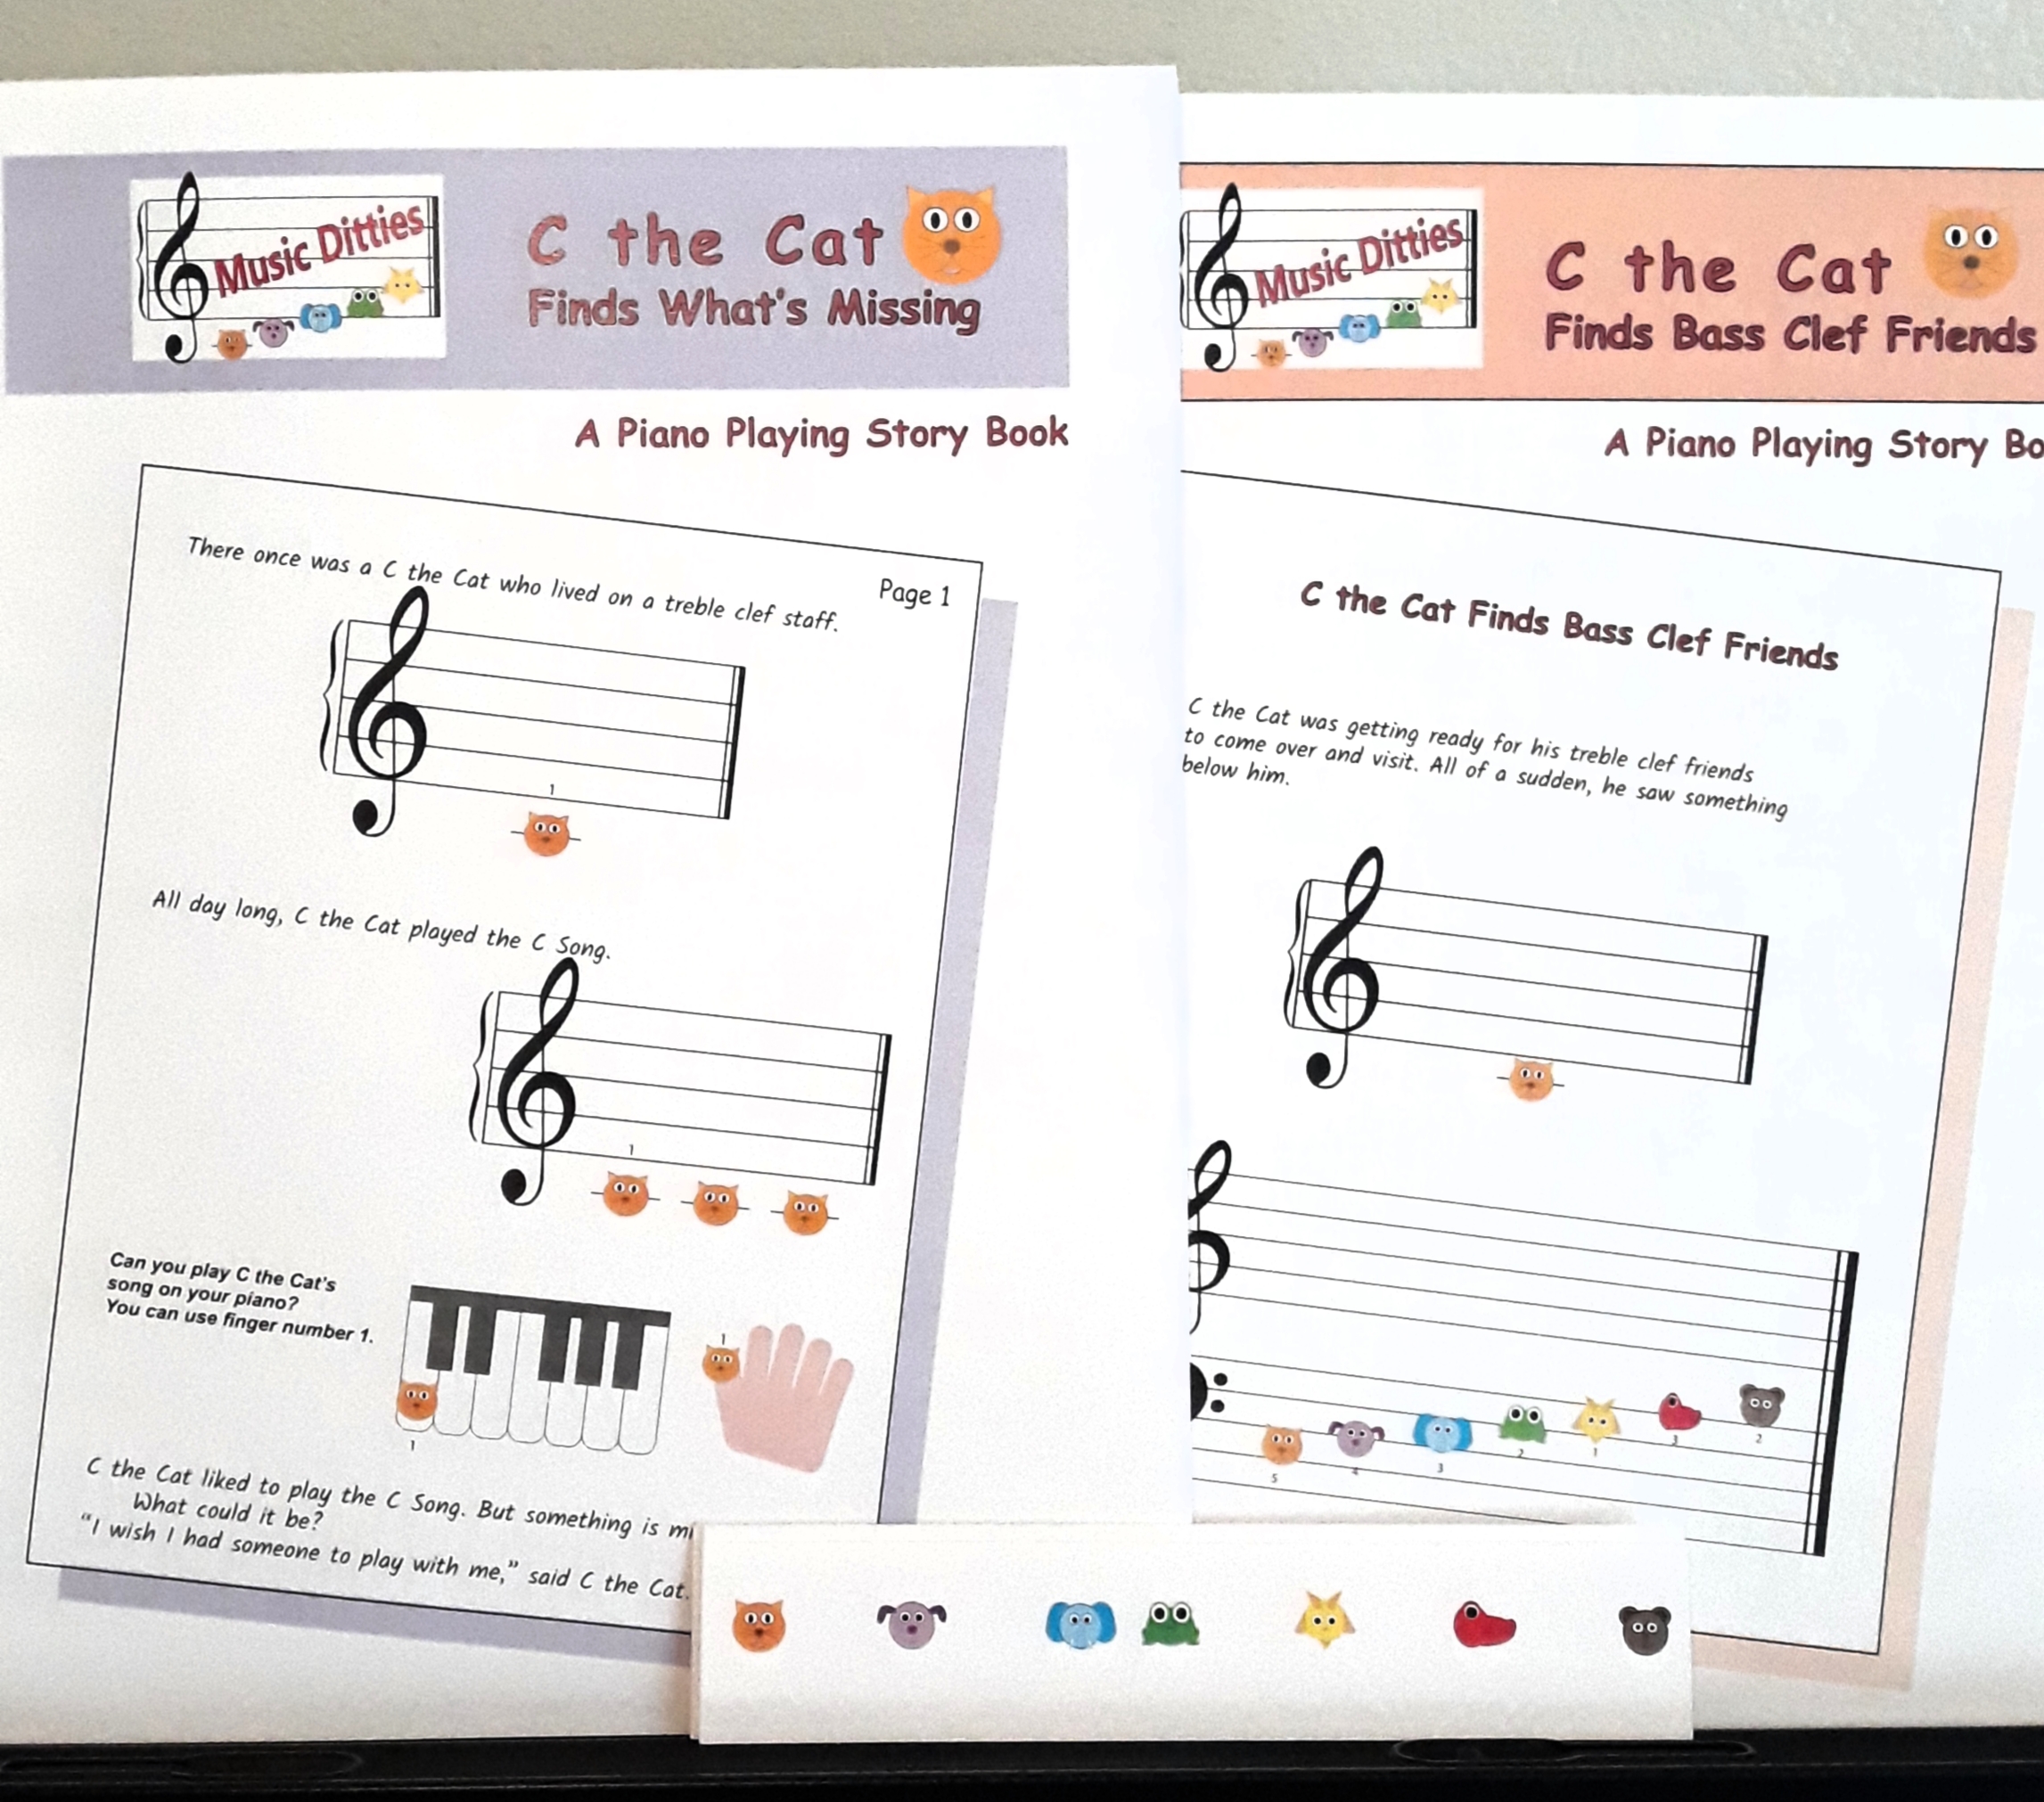 C The Cat Bundle is available with chart cards